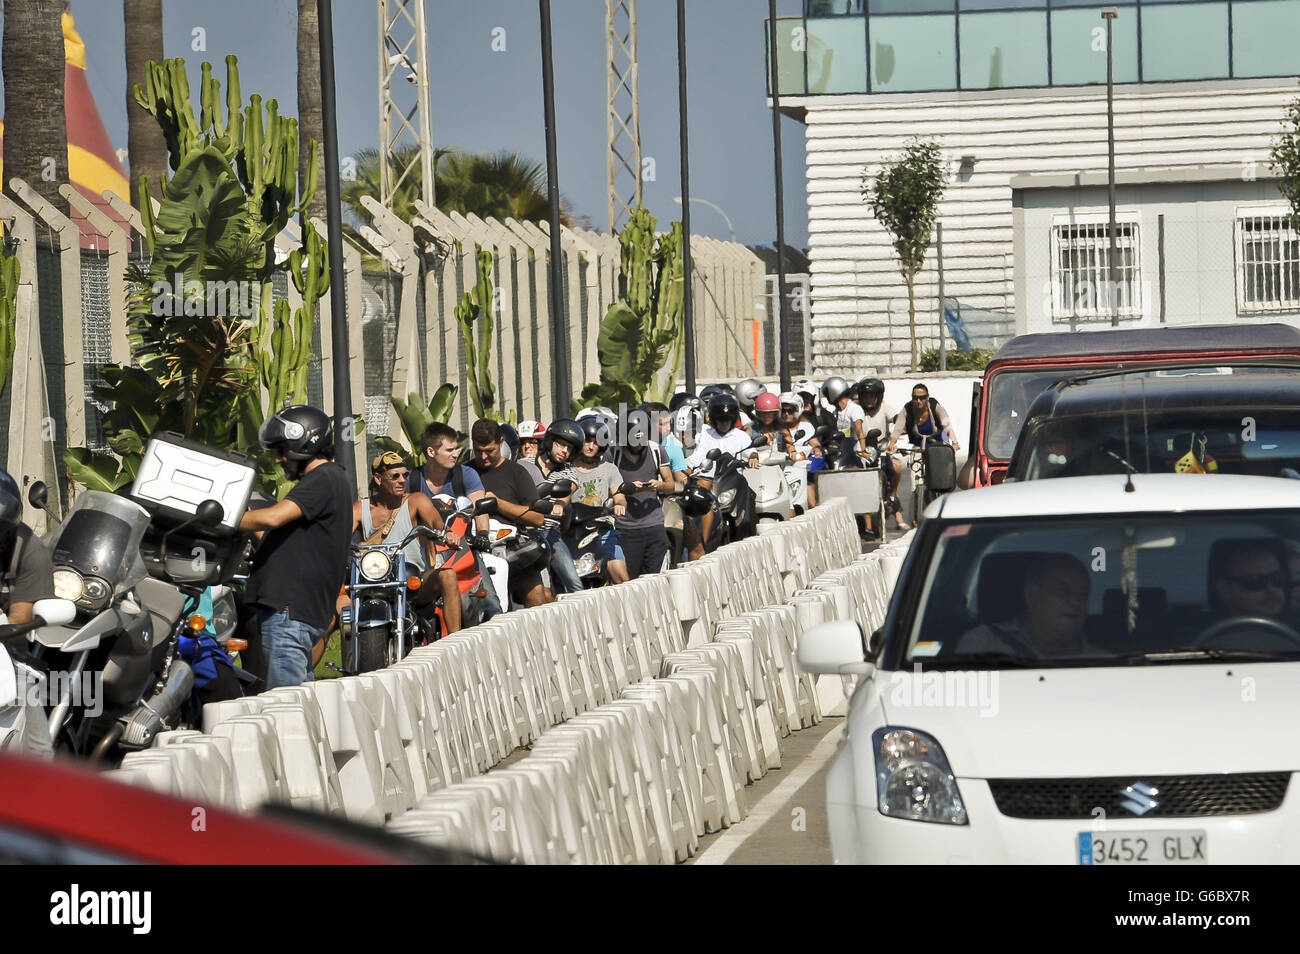 Motorcyclists and scooter riders sit in a separate lane traffic queues on the Gibraltar side of the Spanish border as Spain has agreed to allow European Commission observers to its border with Gibraltar to assess the legality of checks on traffic that caused a diplomatic row with Britain. Stock Photo